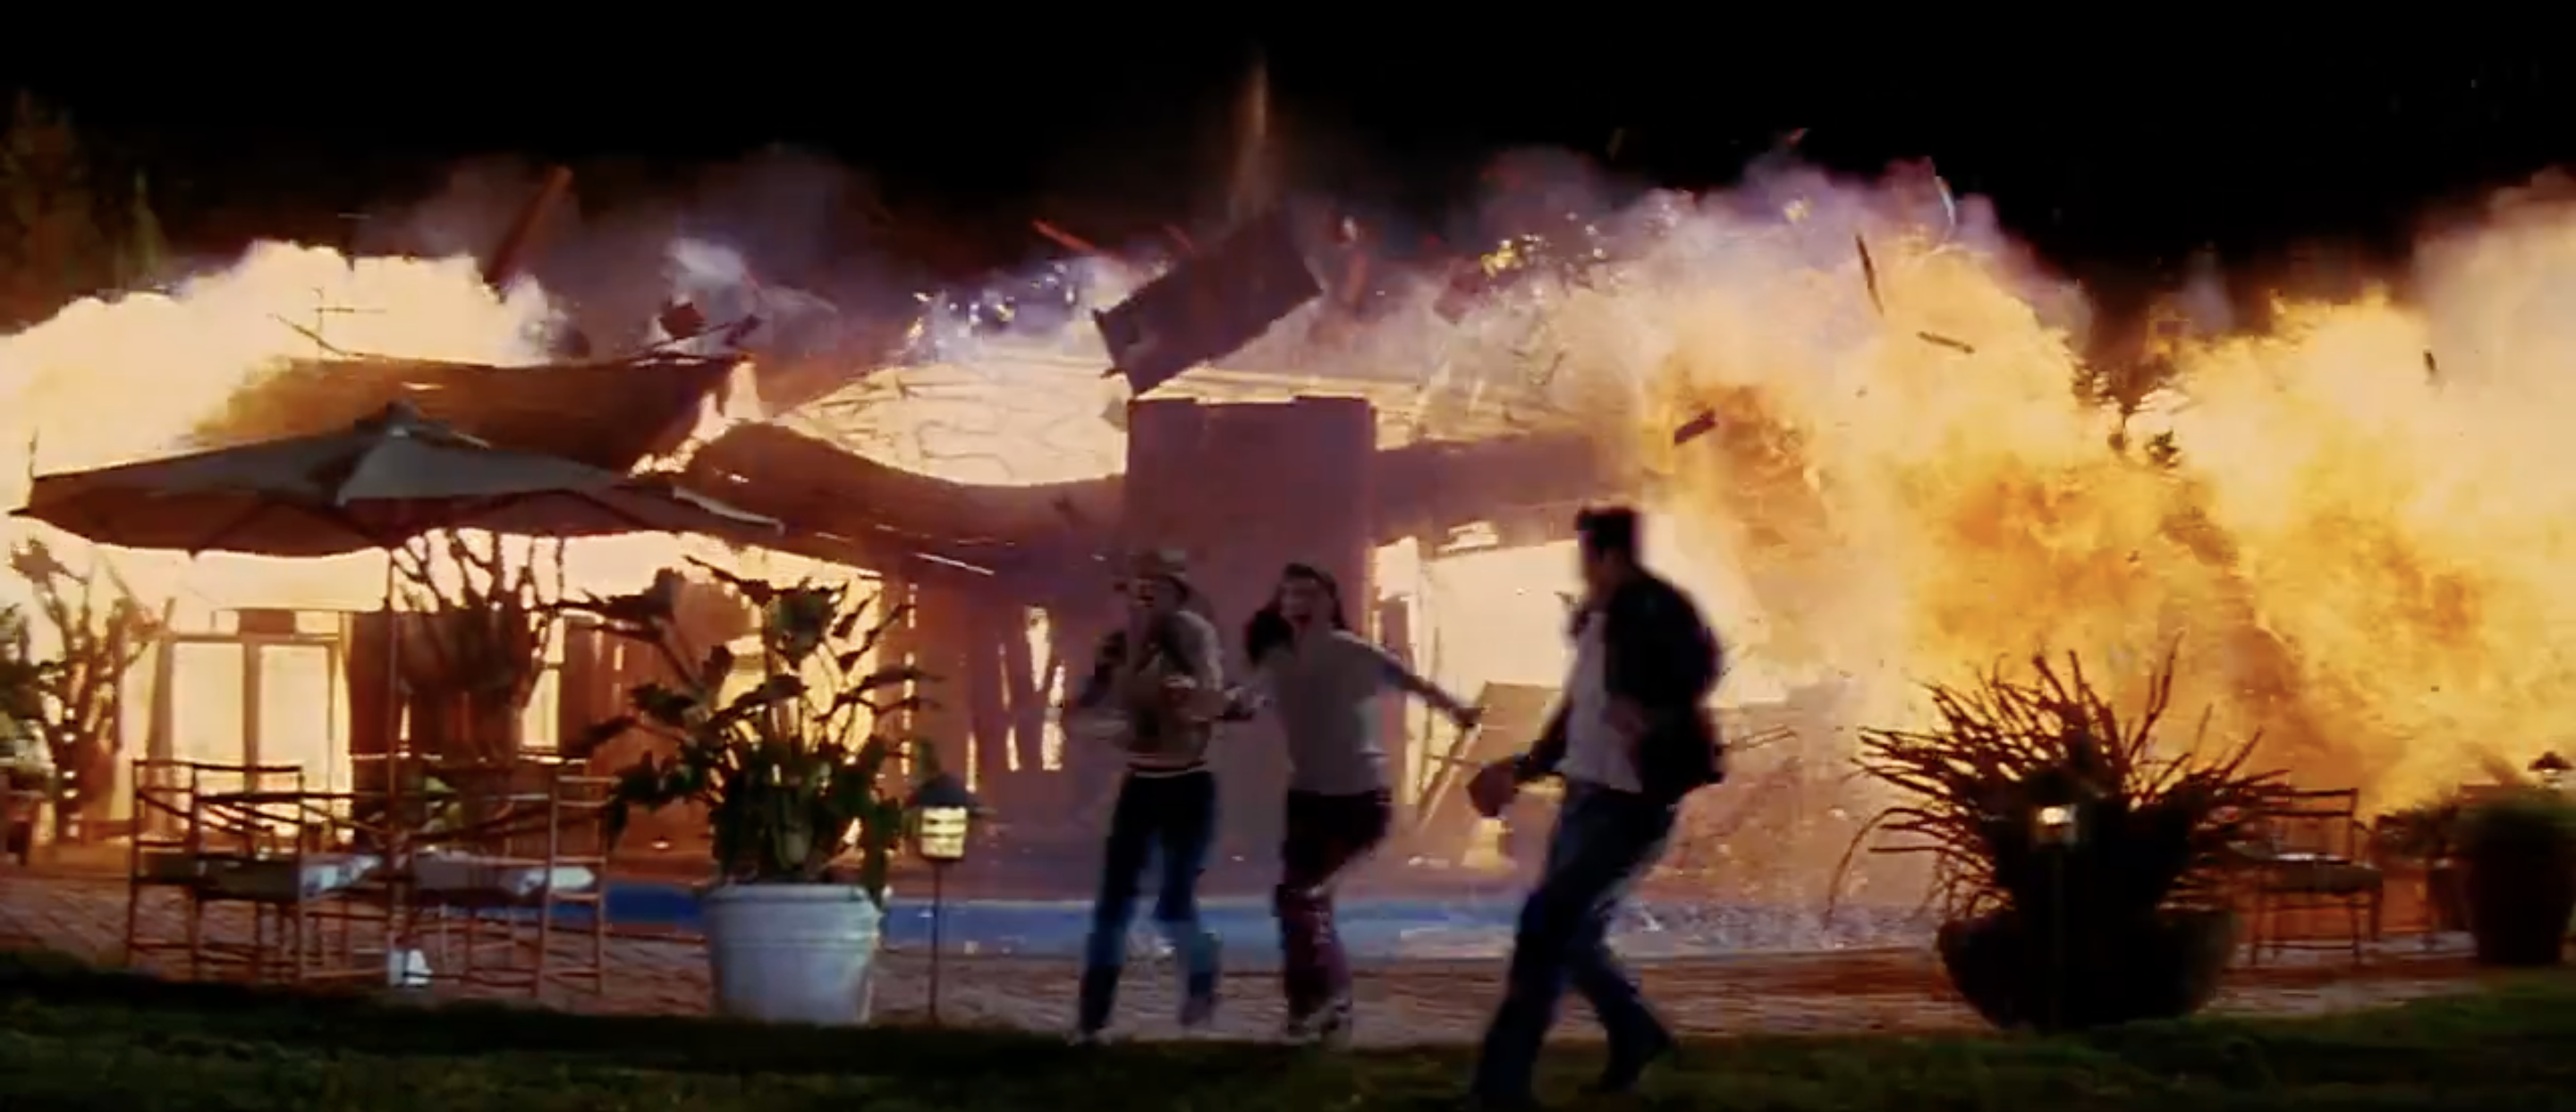 A house explodes as people run away from it